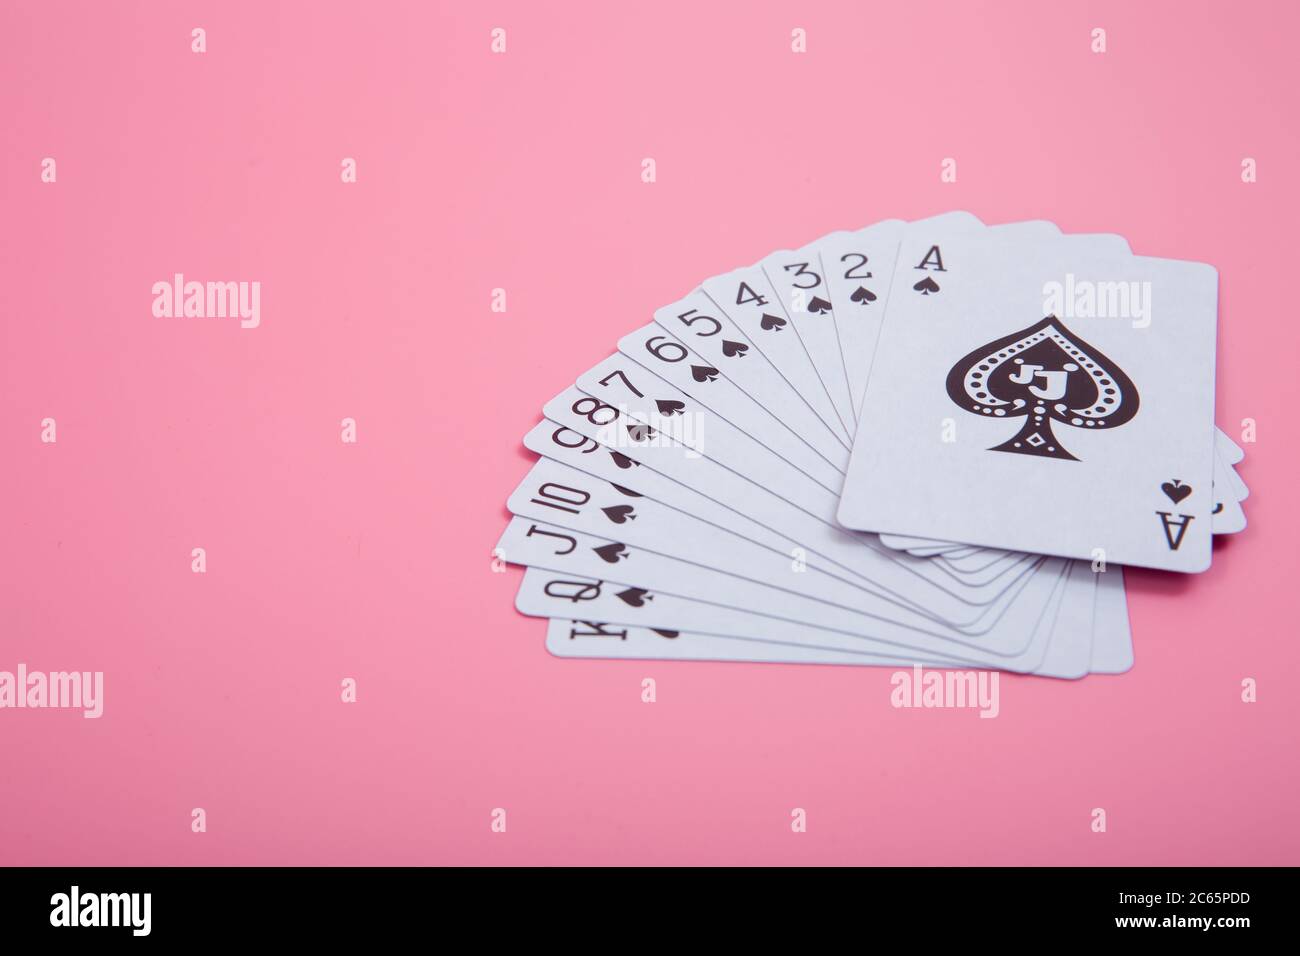 Expanded playing cards on pink background Stock Photo